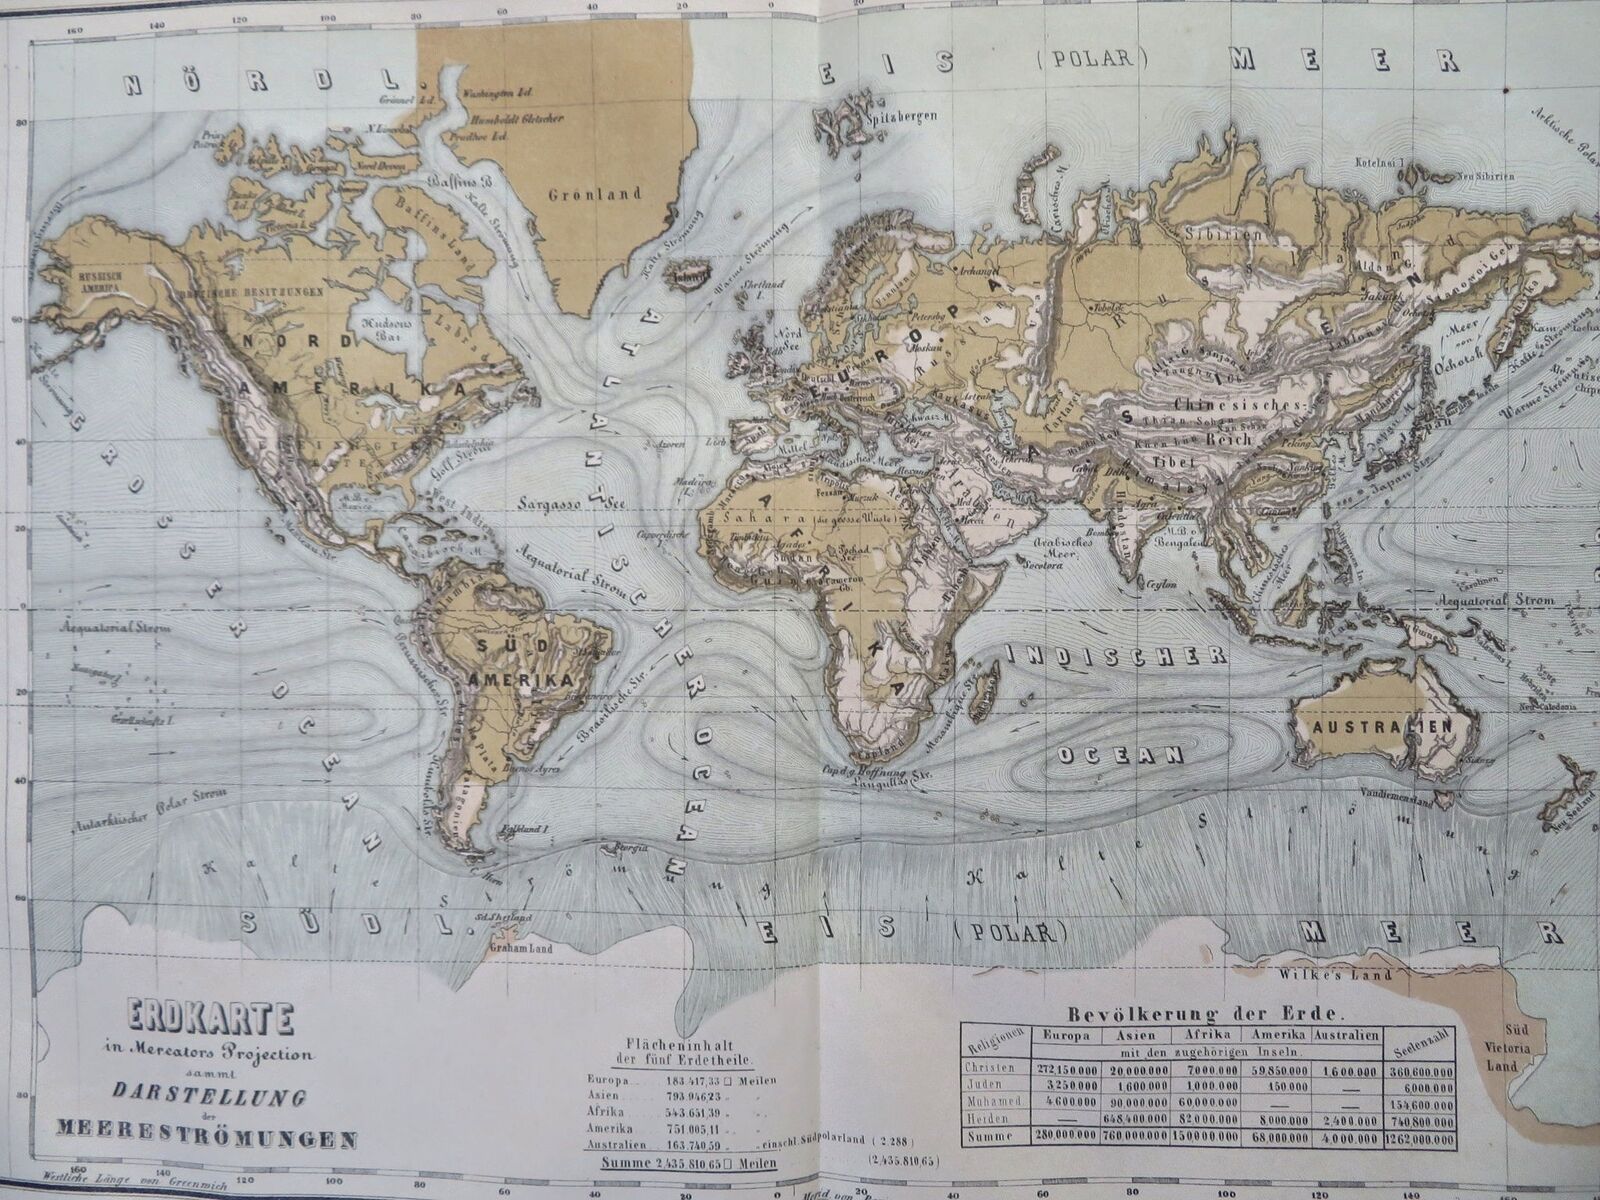 World Map on Mercator's Projection Ocean Currents Gulf Stream 1858-59 map